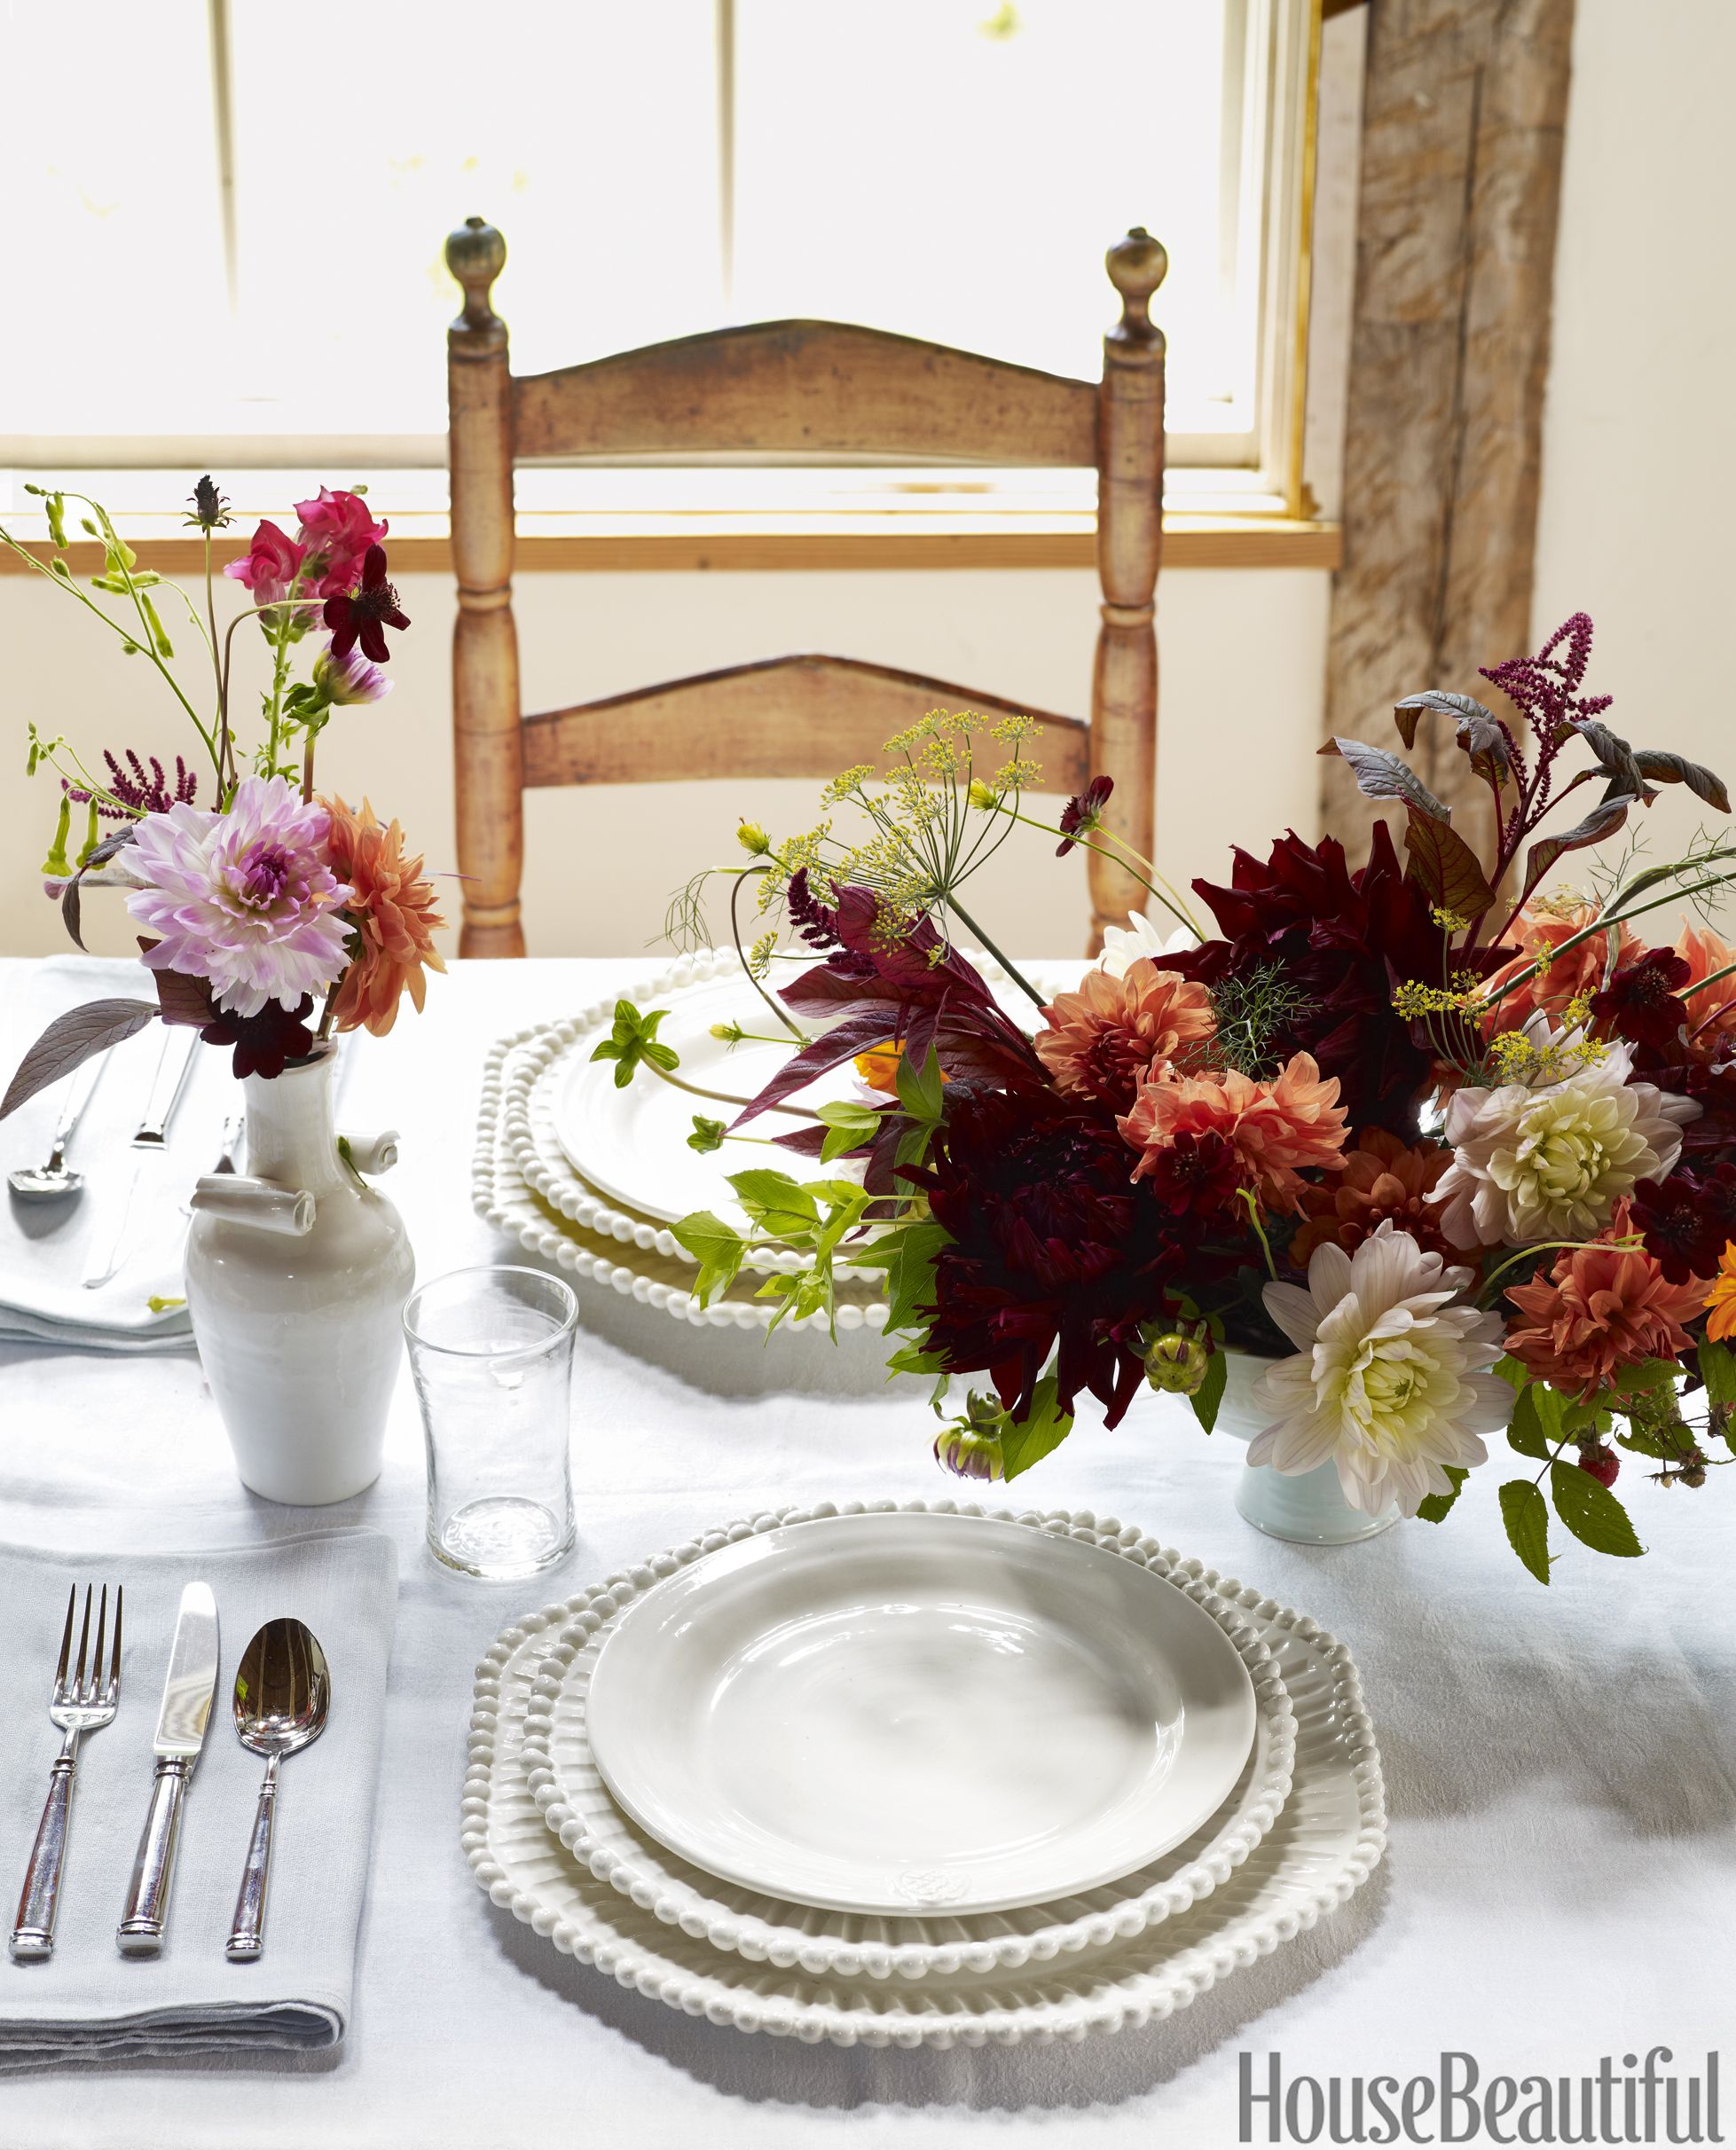 35 Fall Flower Arrangements - Ideas For Fall Table Centerpieces